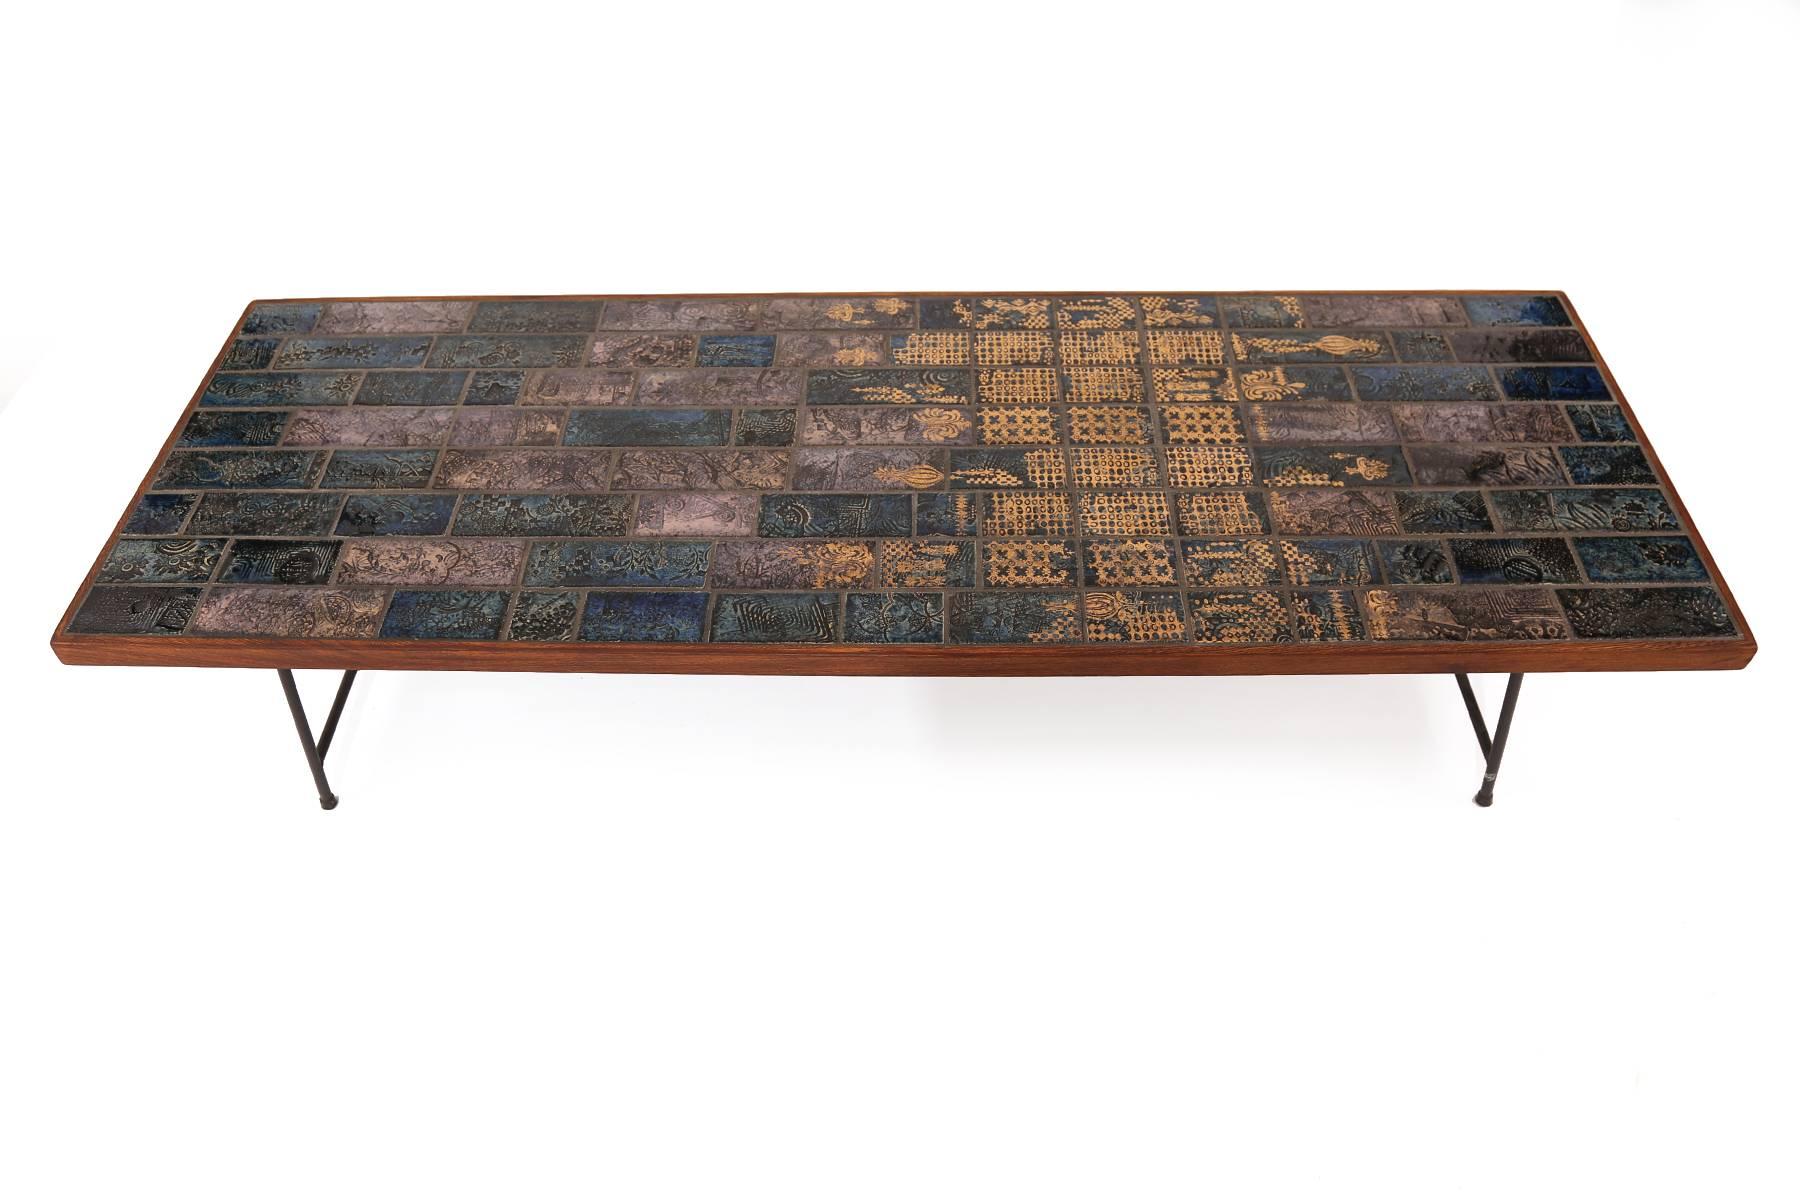 Bjorn Wiinblad tile mahogany and iron cocktail table, circa mid-1960s. This example has beautiful deeply hued inset ceramic tiles on the top with solid mahogany banding.
The base is patinated solid iron.